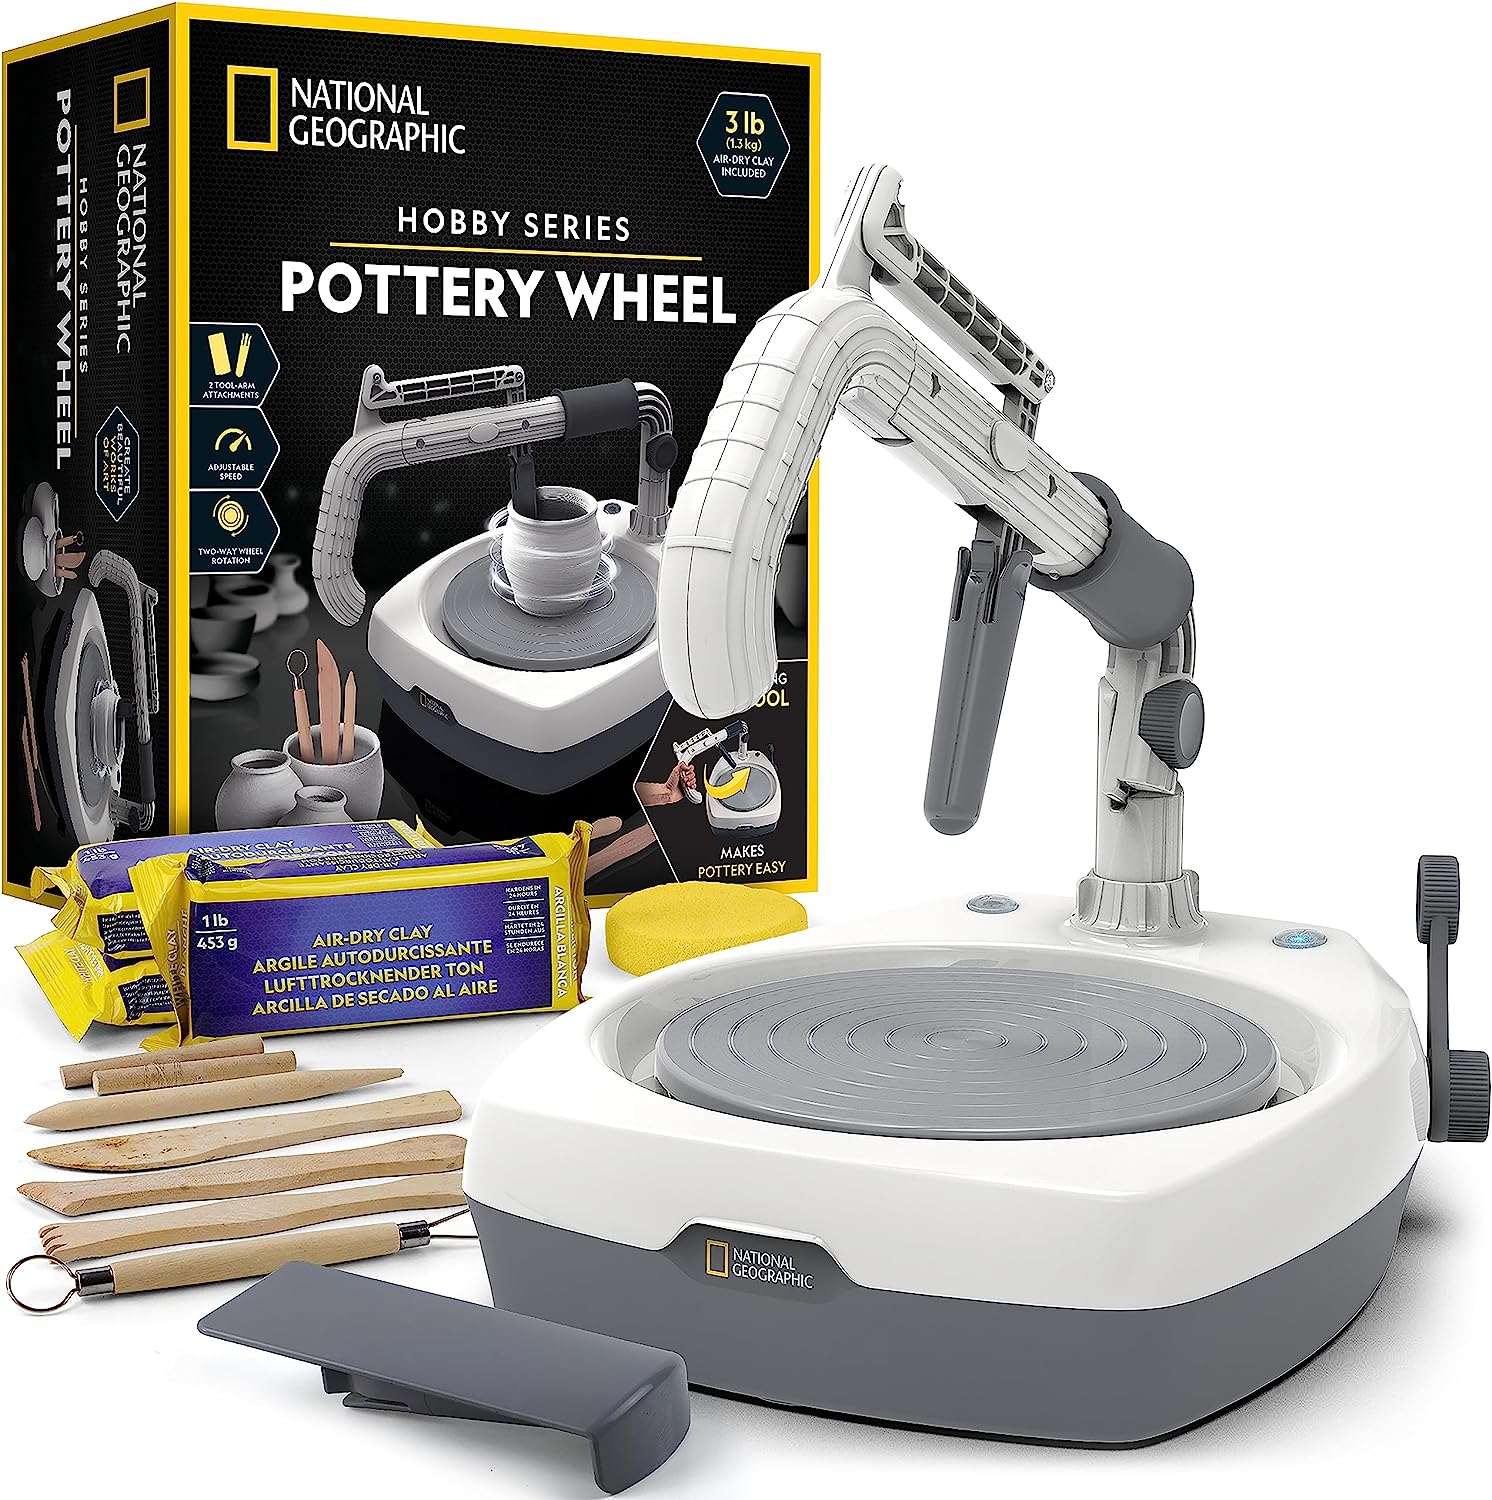  NATIONAL GEOGRAPHIC Deluxe Pottery Wheel Kit – Complete Starter  Pottery Set, Plug-In Motor, 3 lbs. Air Dry Clay, Gemstone Chips, Sculpting  Tools, Patented Arm Tool, Paints & More, Great Kids Craft